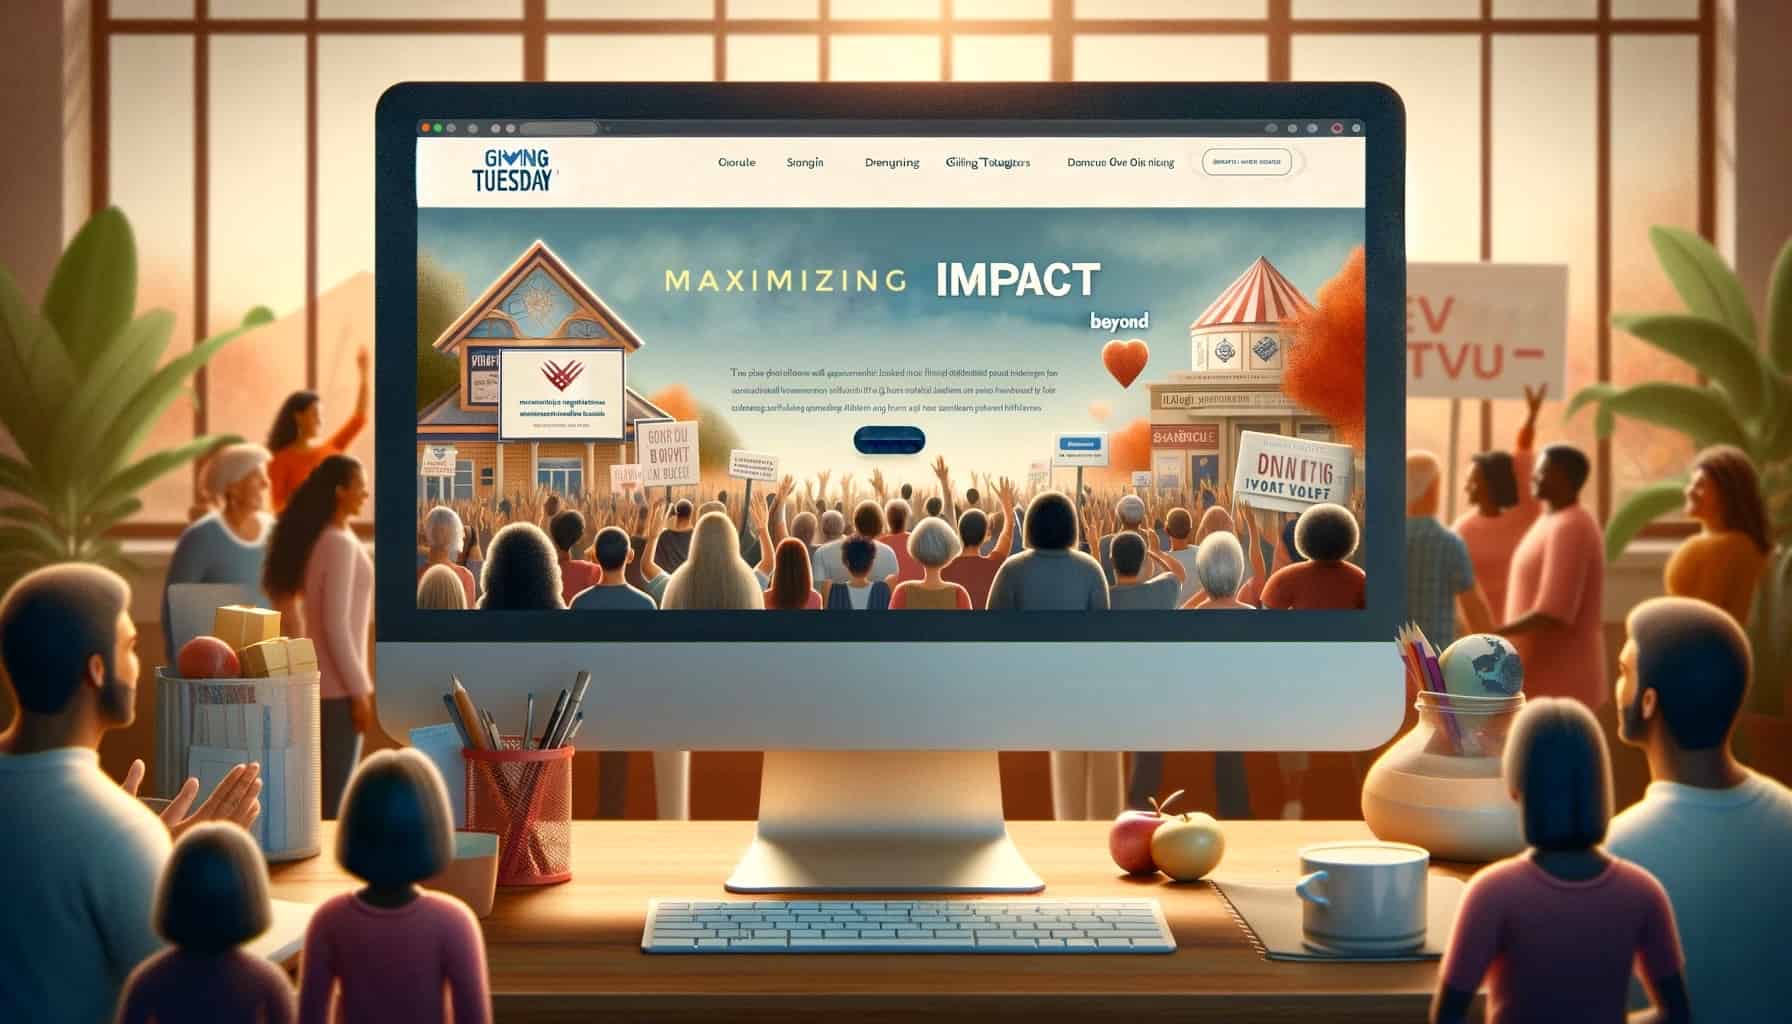 Illustration of people looking at a website that says "Maximizing Impact" for Giving Tuesday.